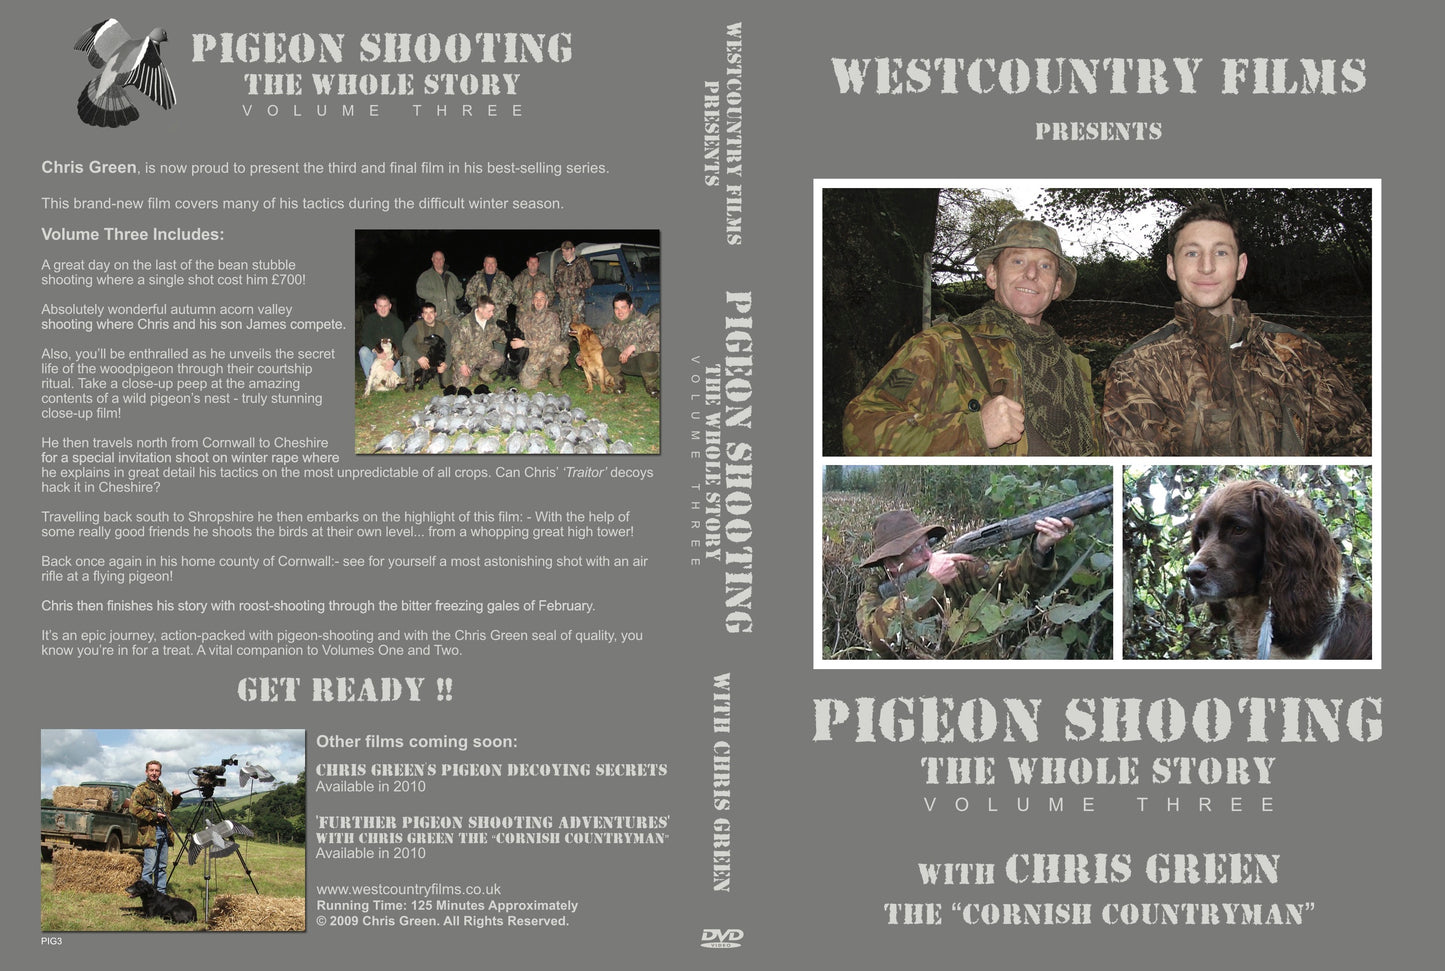 Pigeon Shooting ‘the Whole Story’ Volume Three